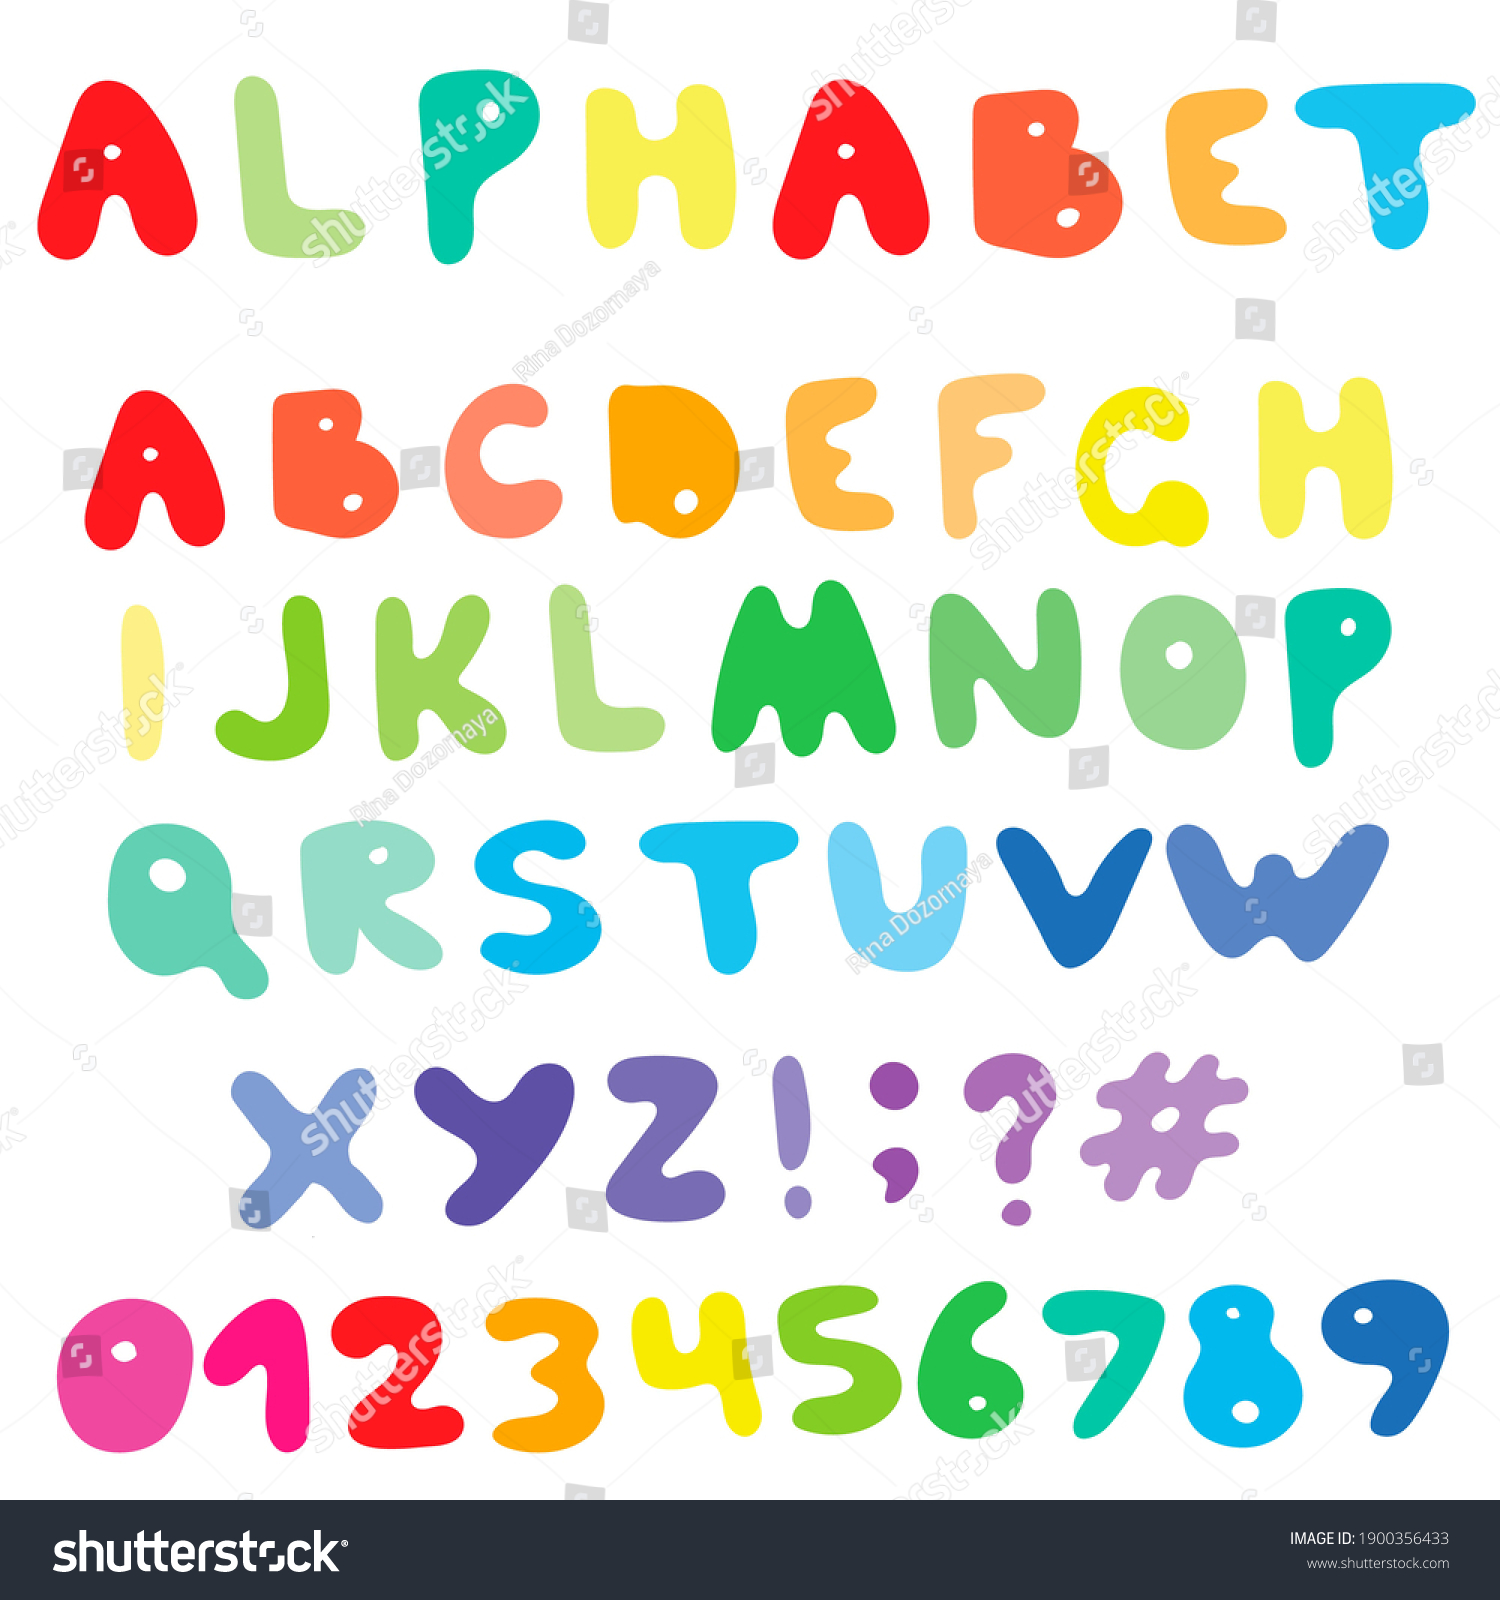 Isolated Hand Drawn Colores Alphabet Stock Illustration 1900356433 ...